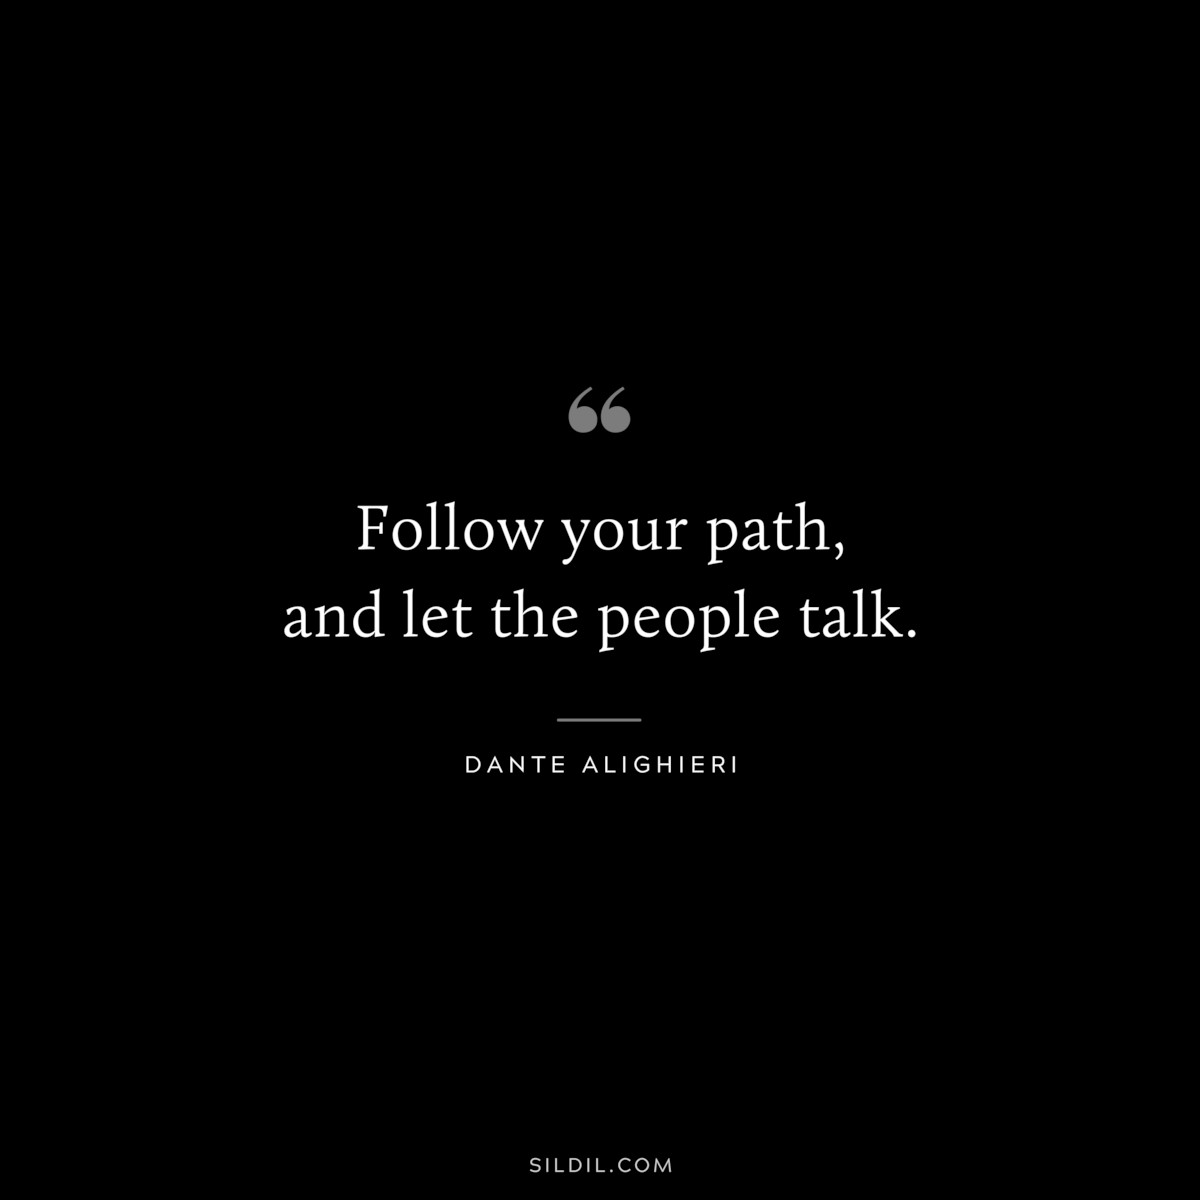 Follow your path, and let the people talk. ― Dante Alighieri